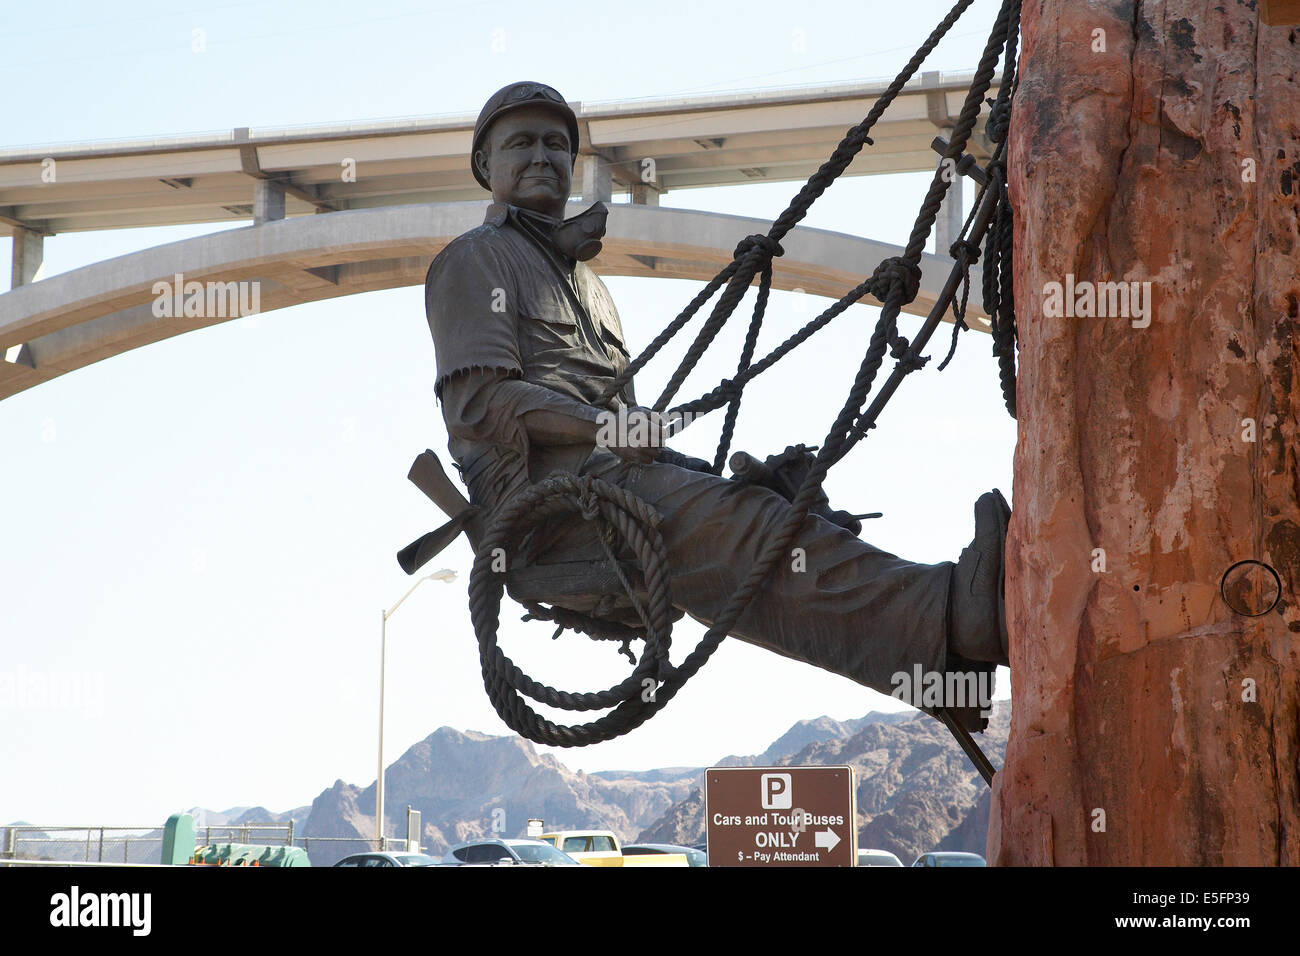 Statue of dam worker hanging on cliff at Hoover Dam, Nevada with the Mike O'Callaghan-Pat Tillman Memorial Bridge behind. Stock Photo